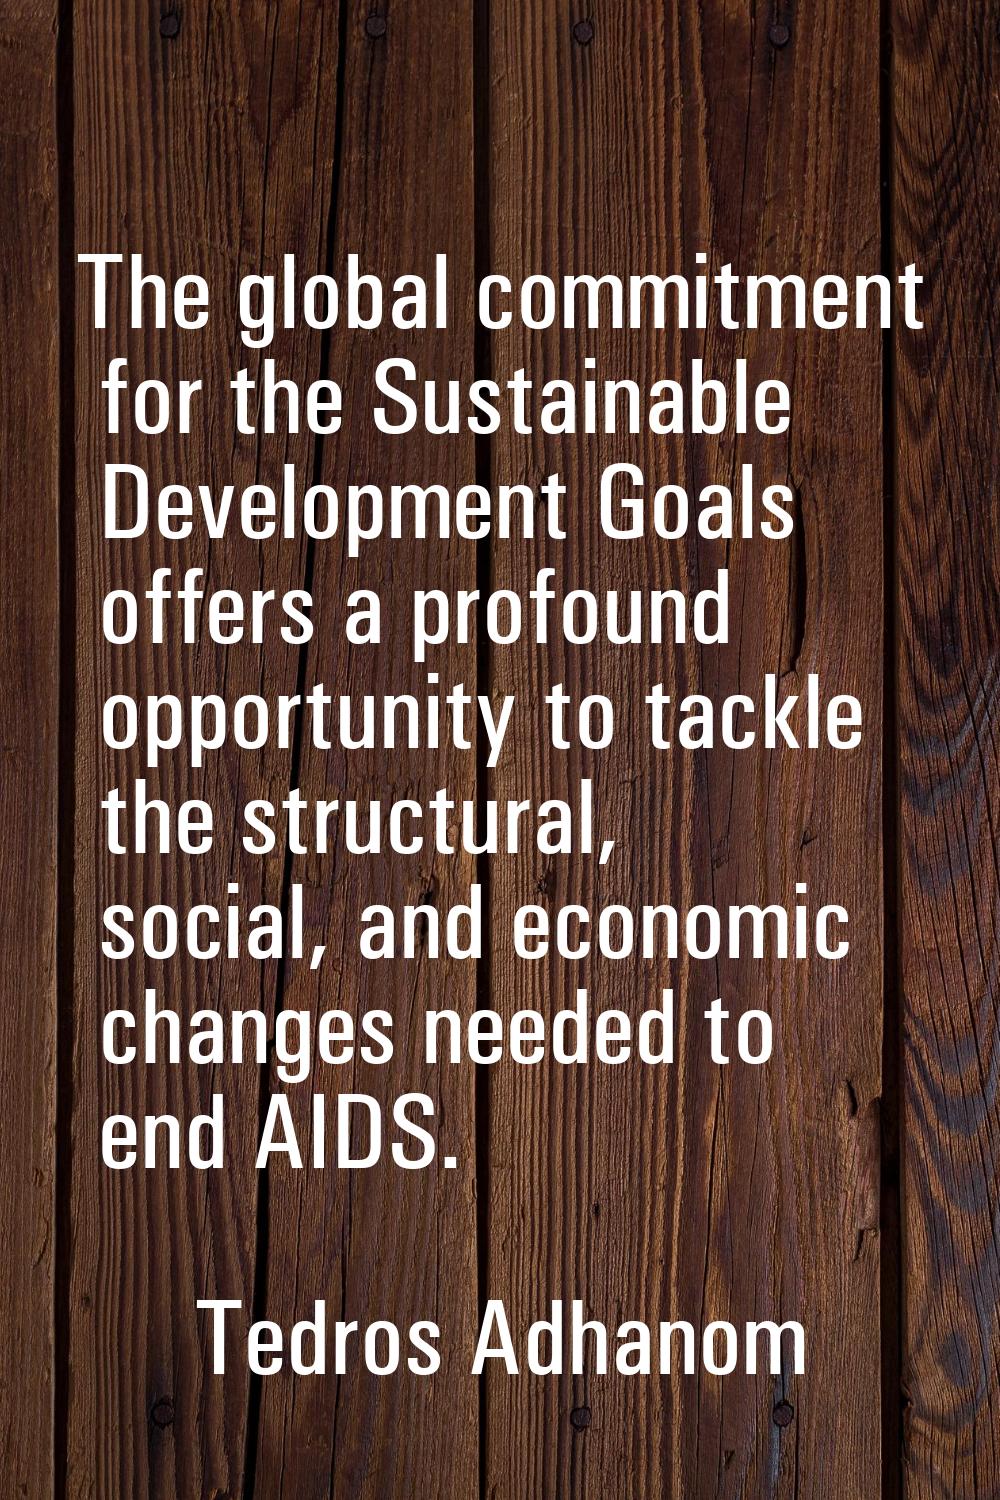 The global commitment for the Sustainable Development Goals offers a profound opportunity to tackle